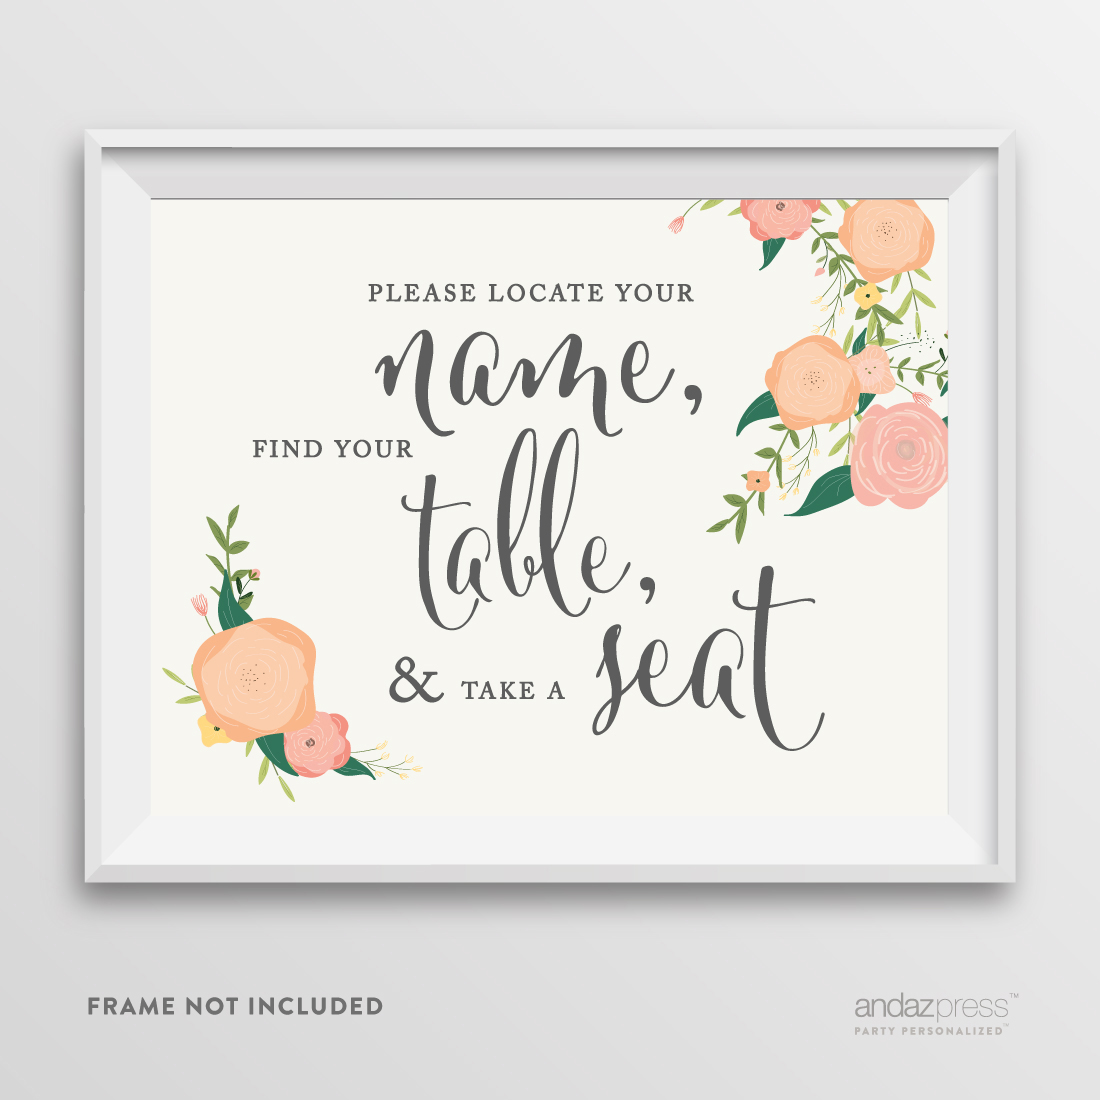 ap10782 andaz press wedding party signs watercolor floral roses print 8 5 inch x 11 inch please locate your name find your table _ take a seat 1 pack